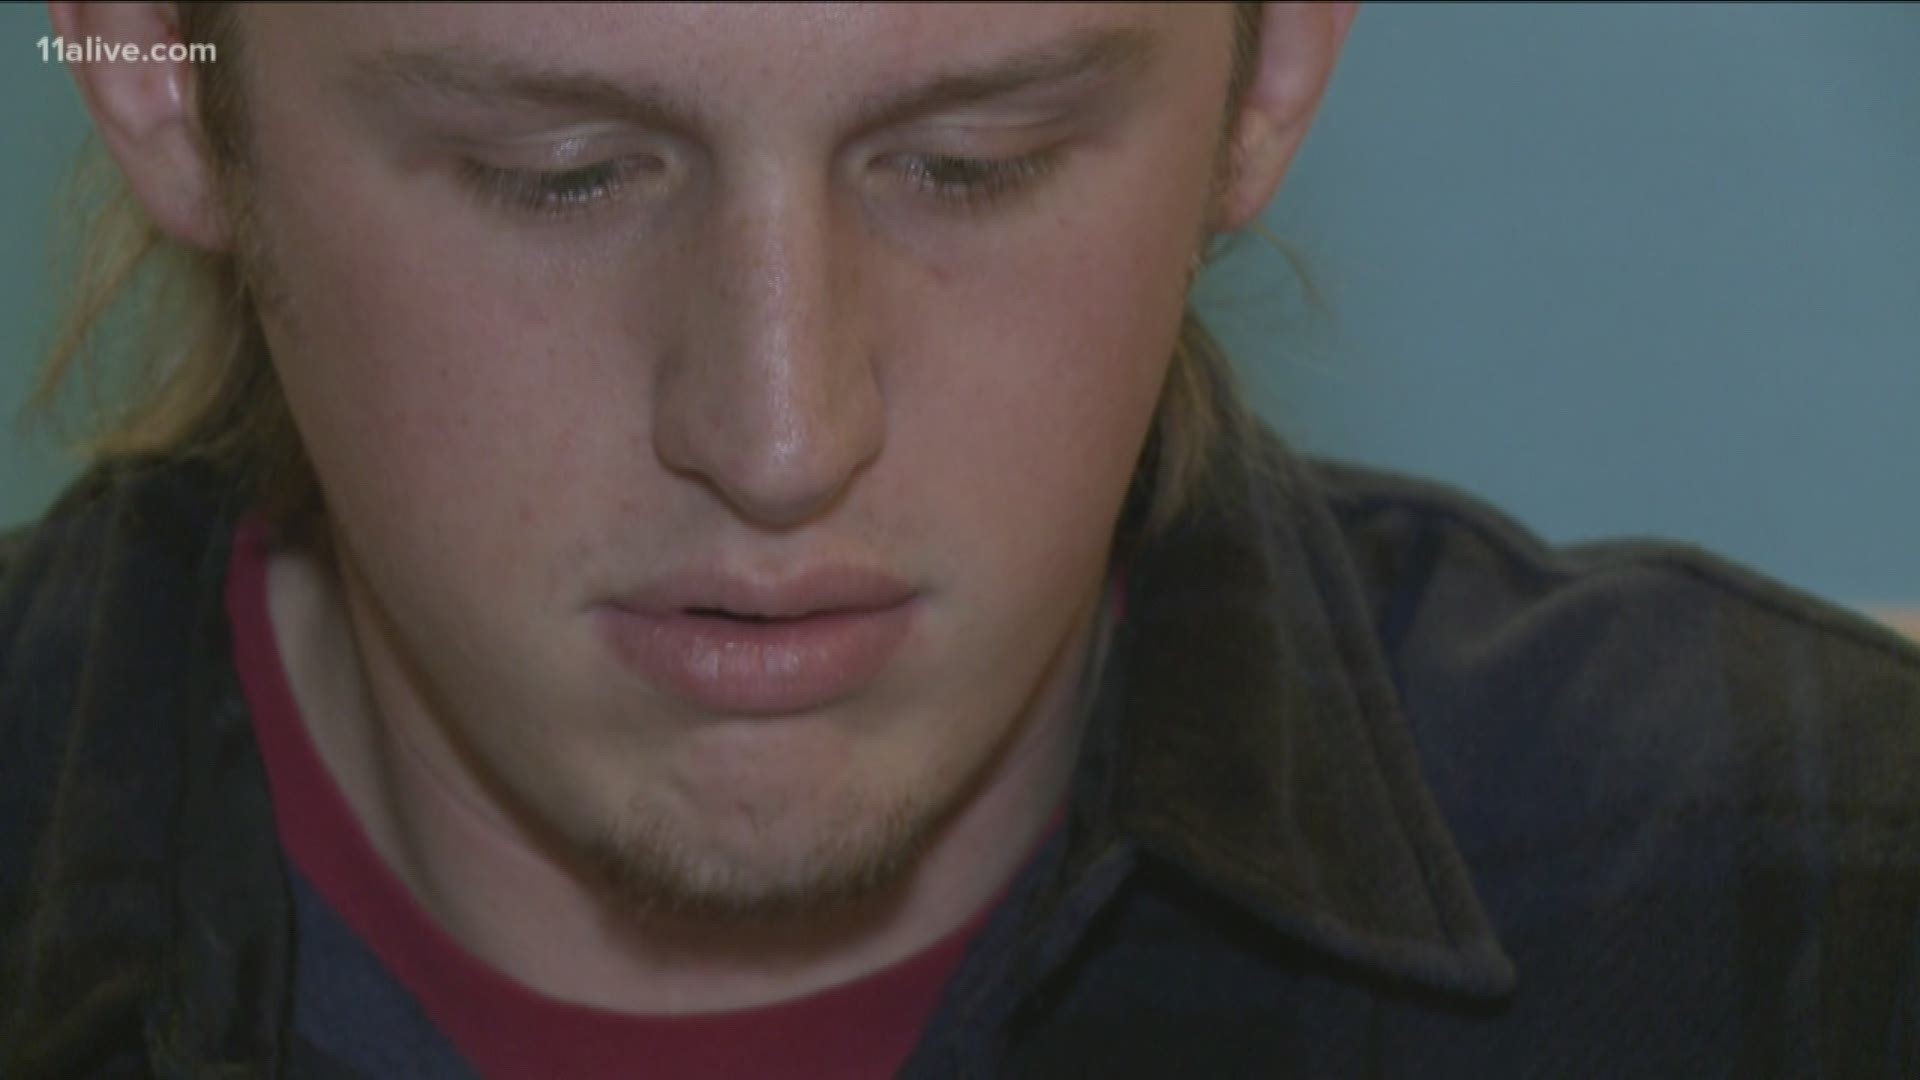 In 2016, Dustin Daigle was trying to start over. He was six months clean from heroin and willing to talk to 11Alive about eight friends he recently lost to the opioid crisis.